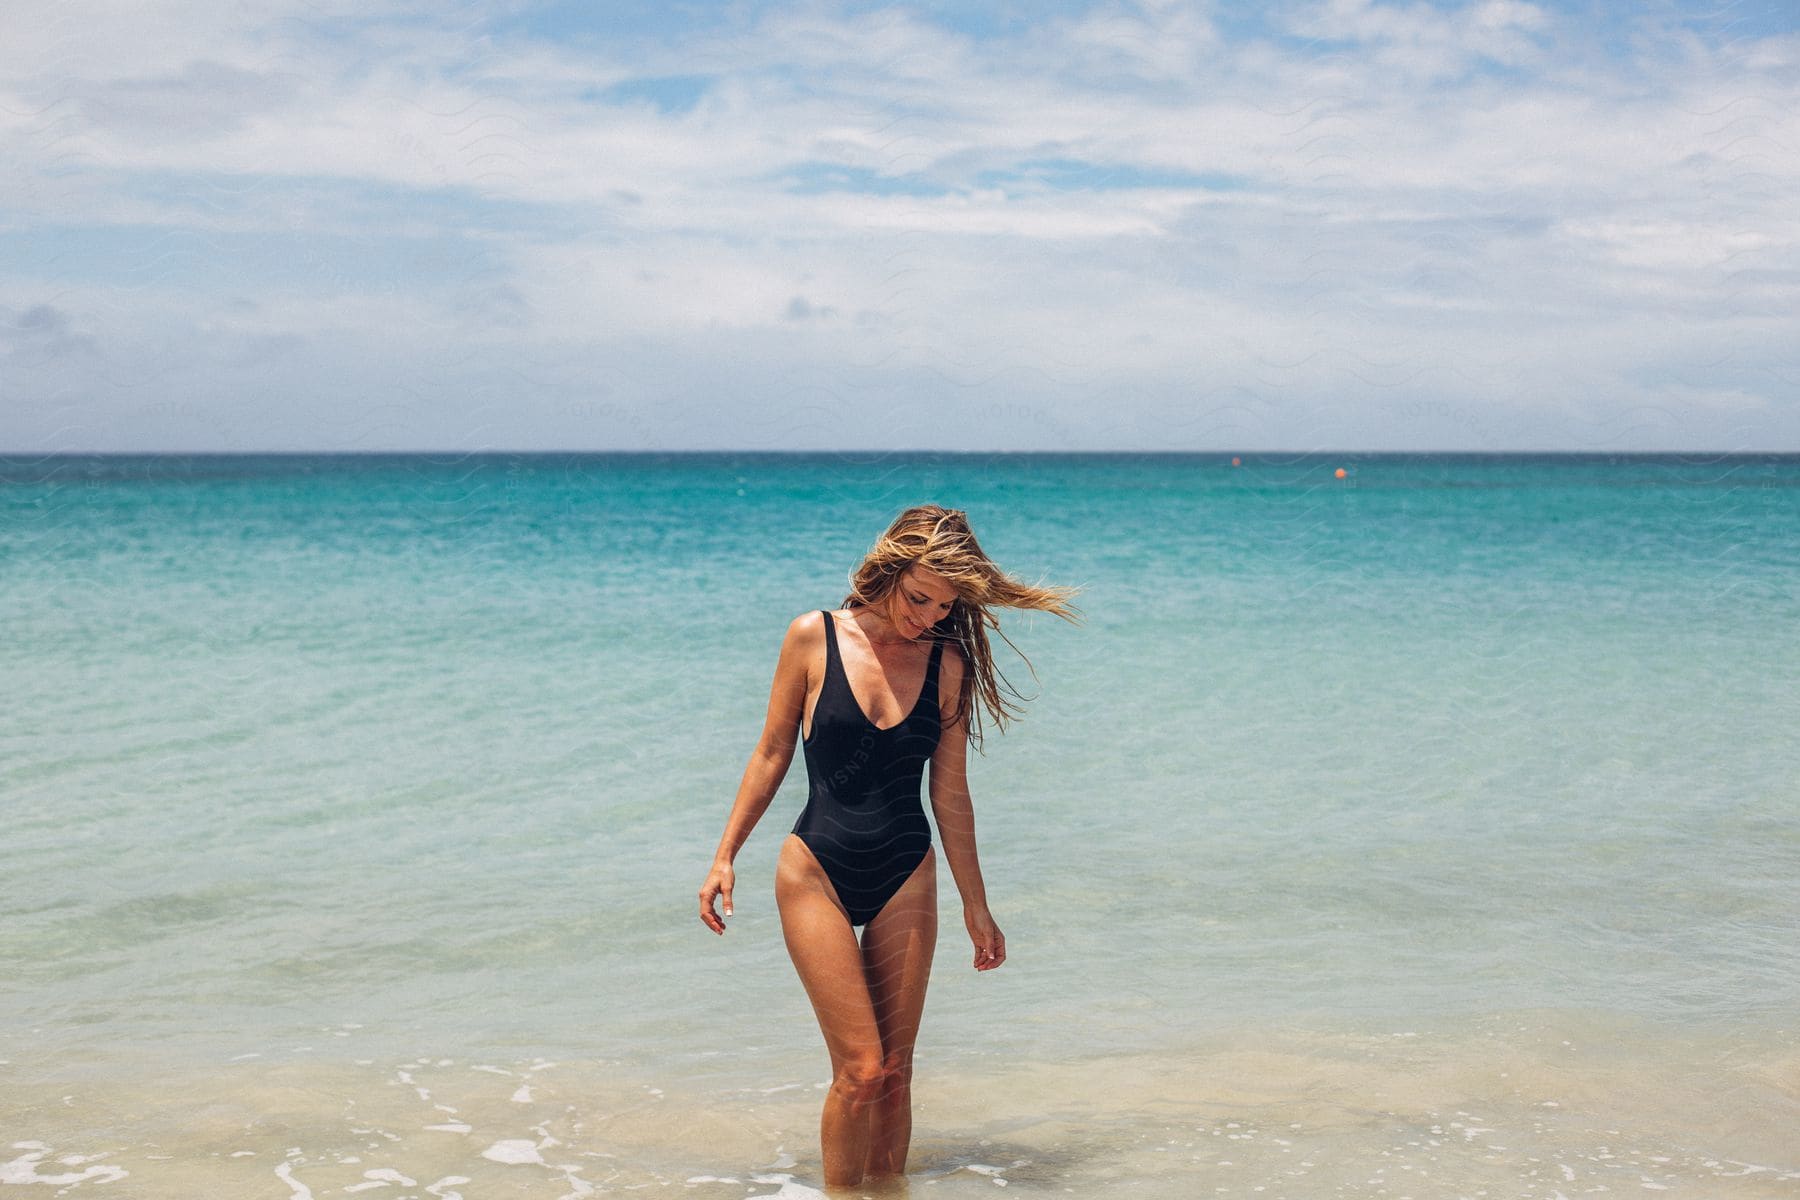 A young woman stands in shallow water on a beach